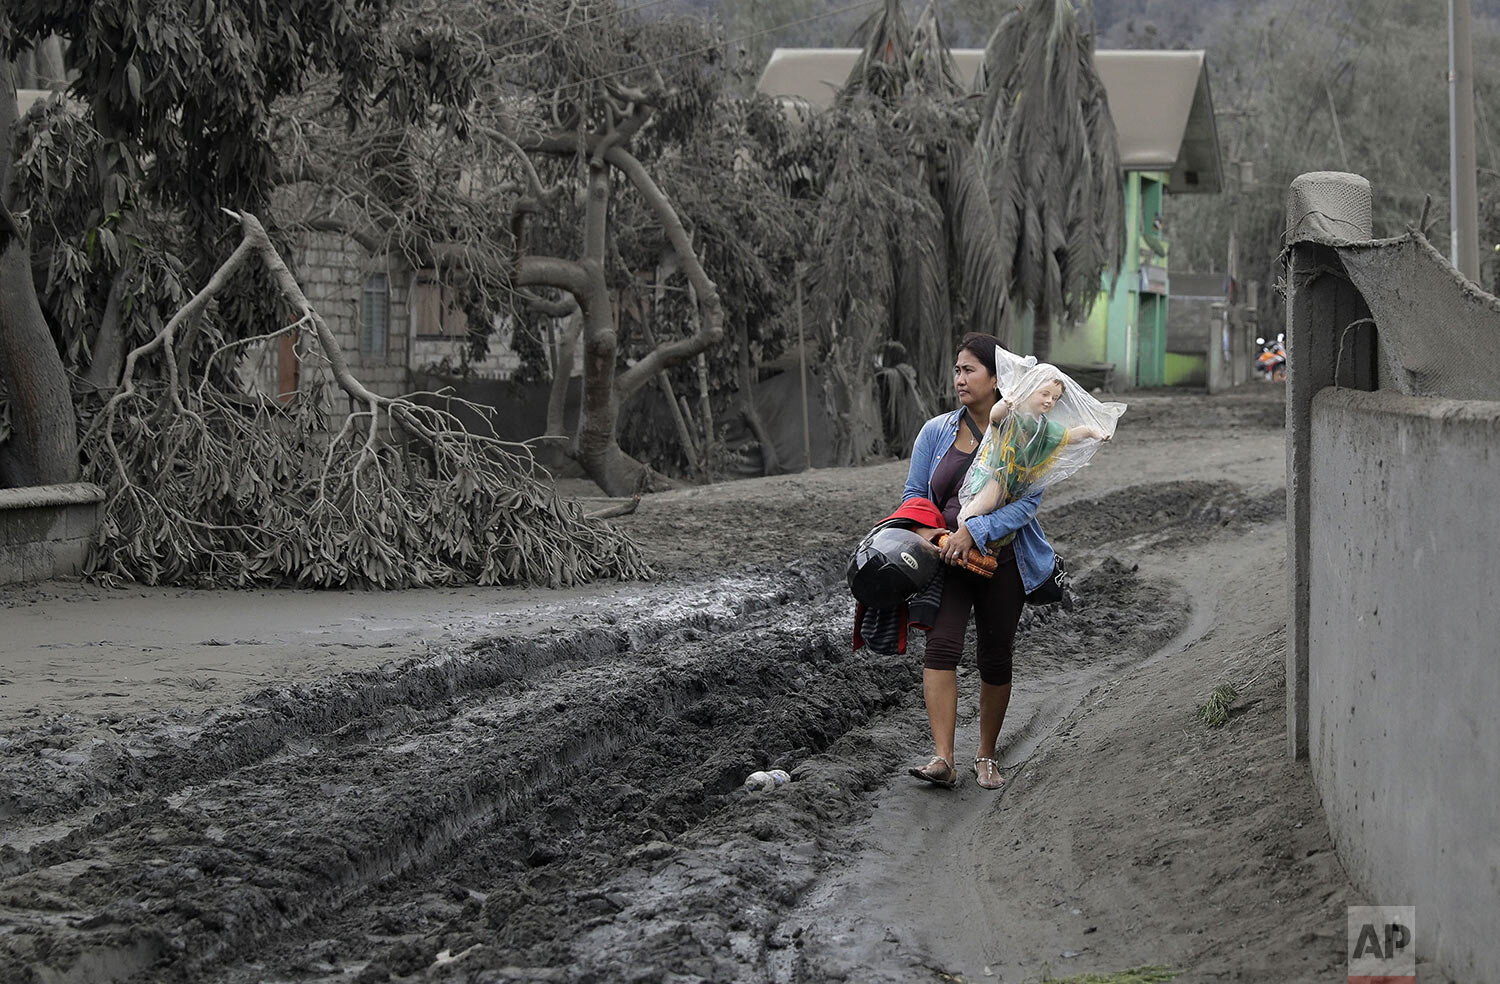  Leila de Castro carries a statue of the baby Jesus which she recovered from the house of her sister as she walks on a road covered with volcanic ash in Boso-Boso, Batangas province, southern Philippines, Tuesday, Jan. 14, 2020. (AP Photo/Aaron Favil